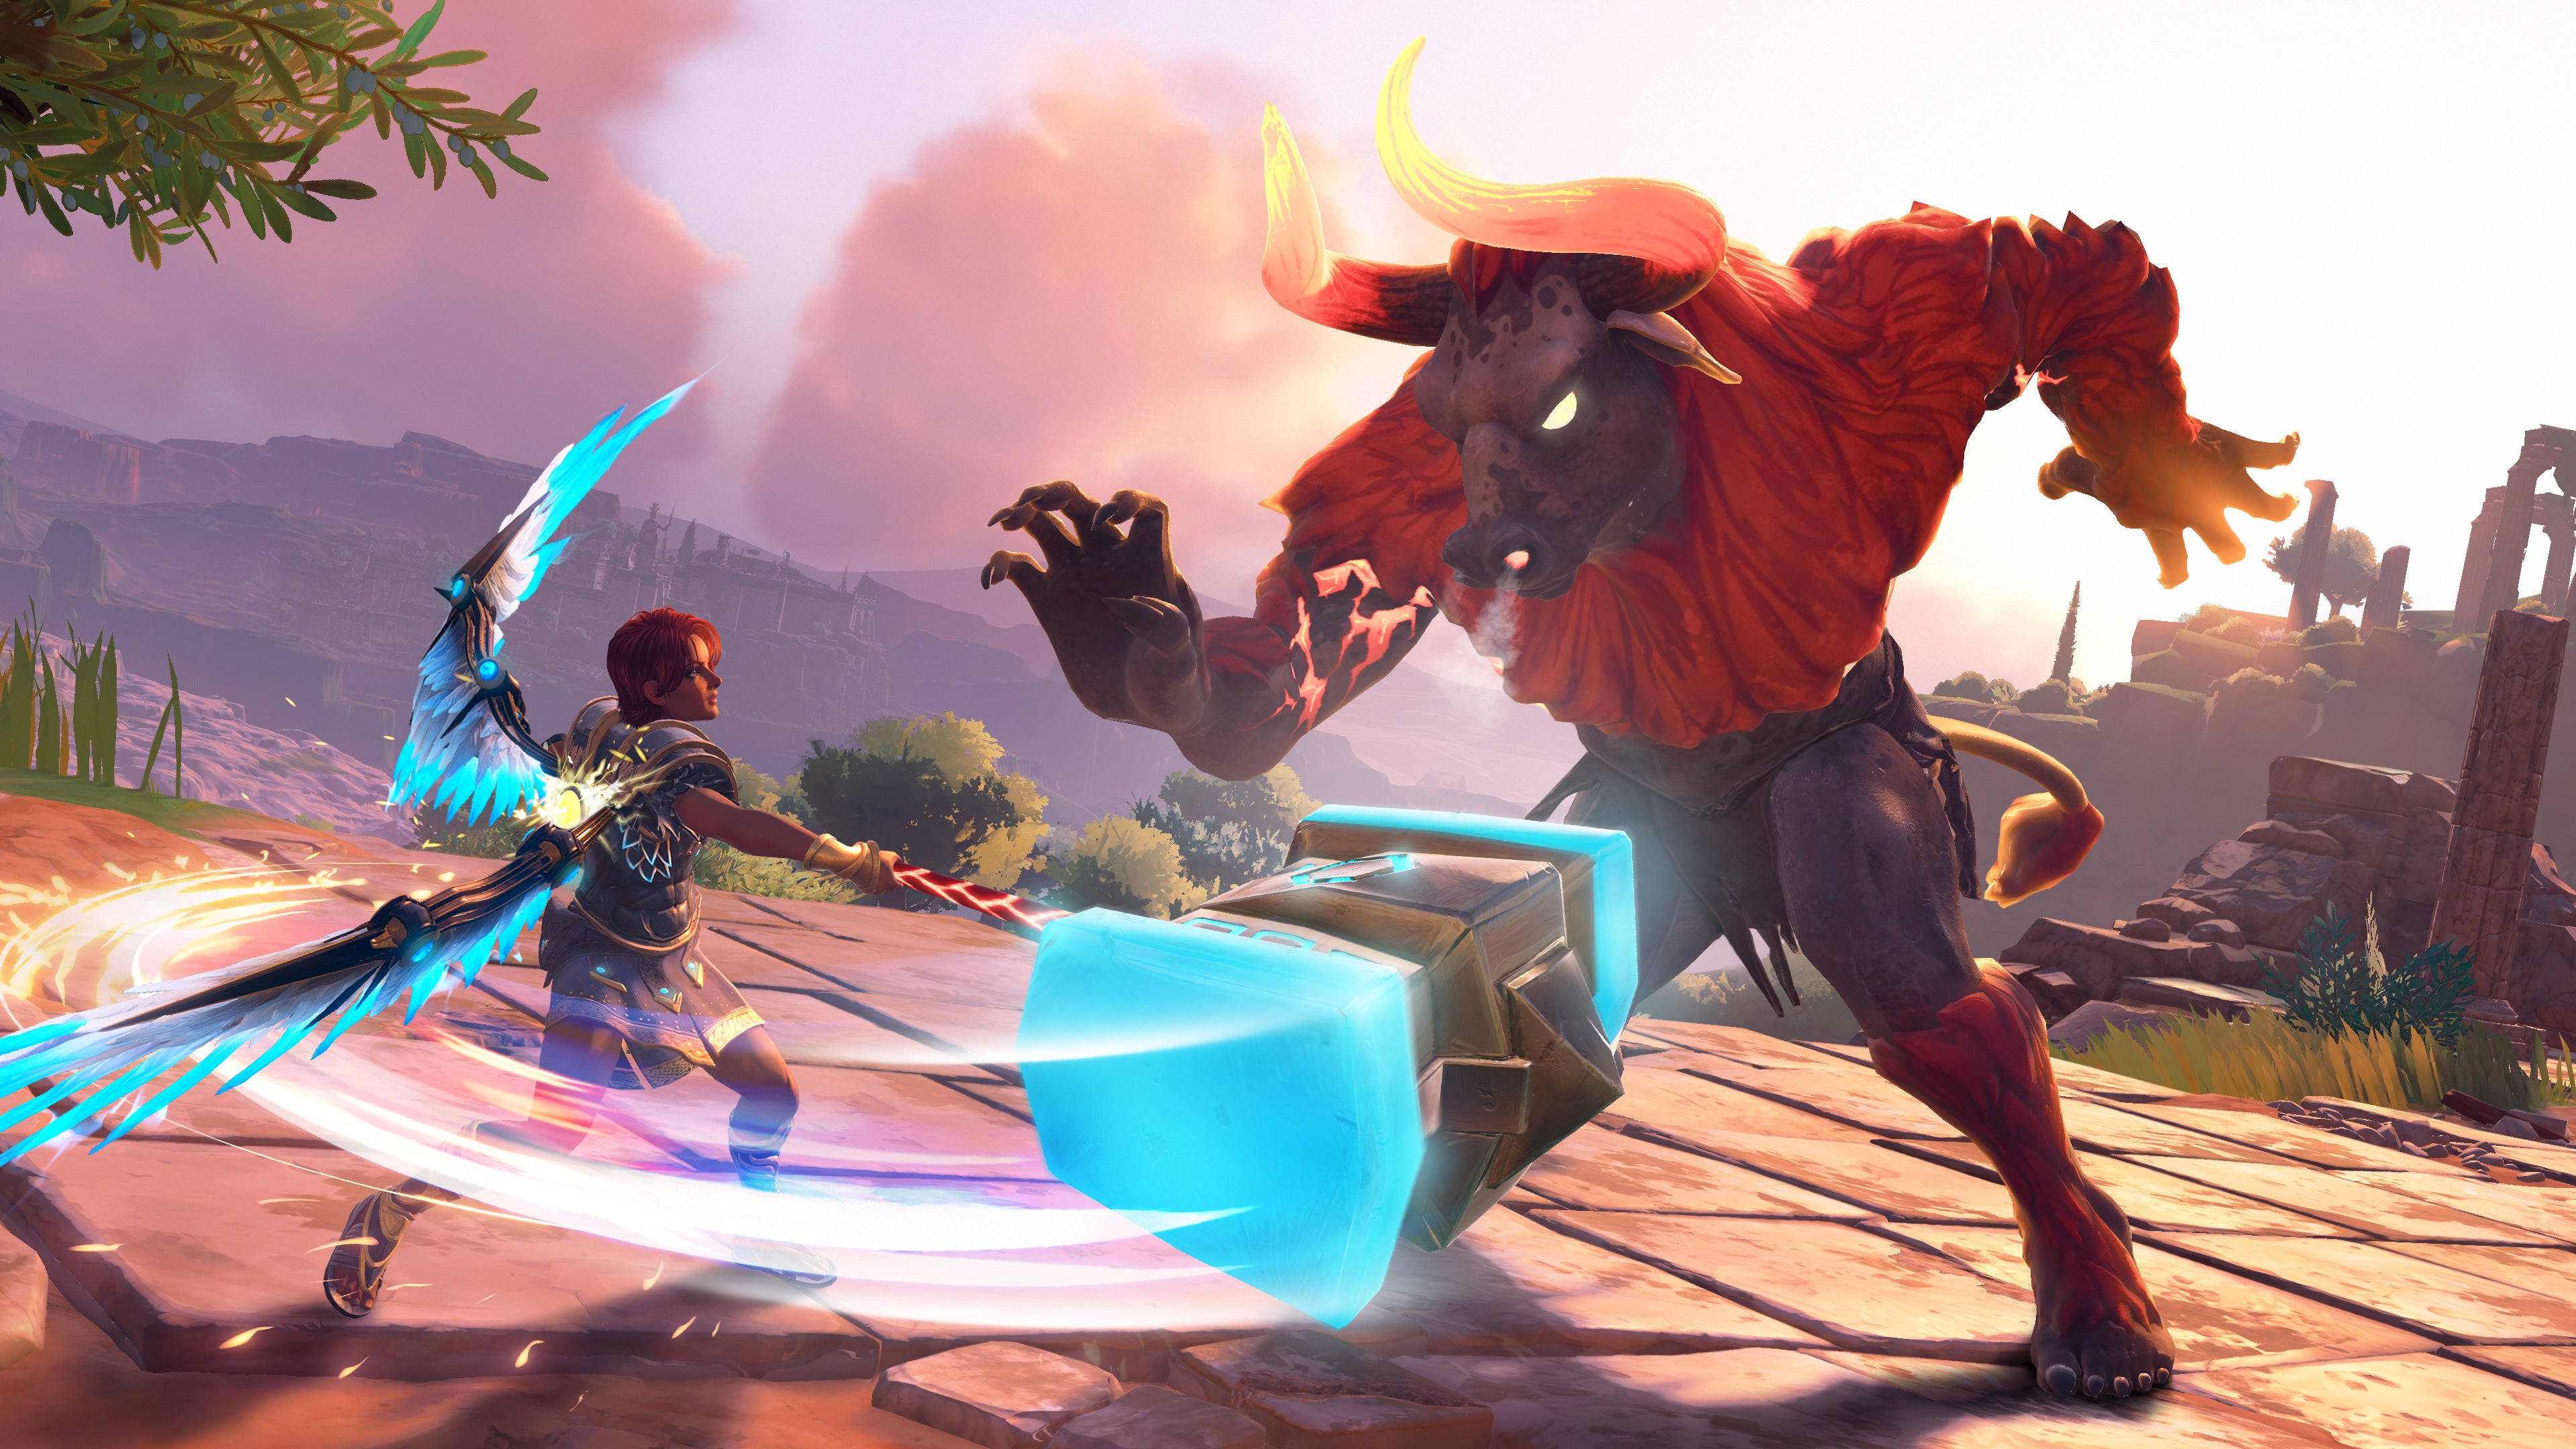 Fenyx uses her hammer against a minotaur in Immortals Fenyx Rising.